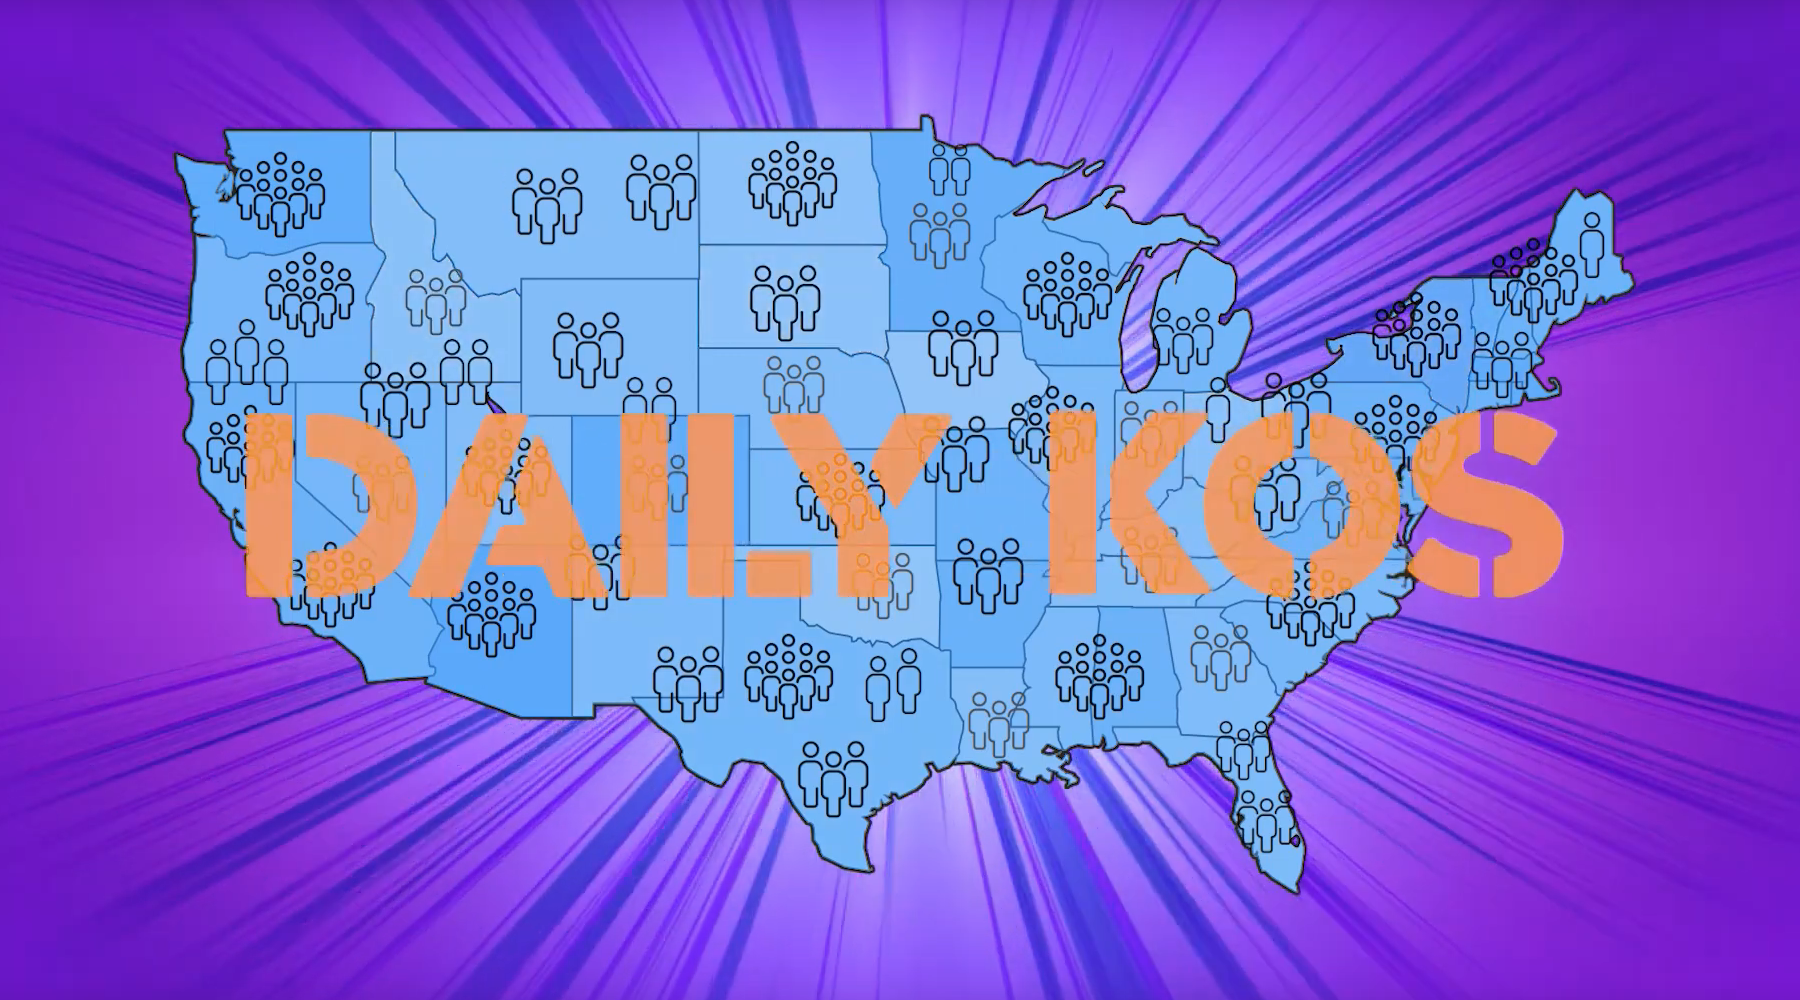 Daily Kos mapped onto the lower 48